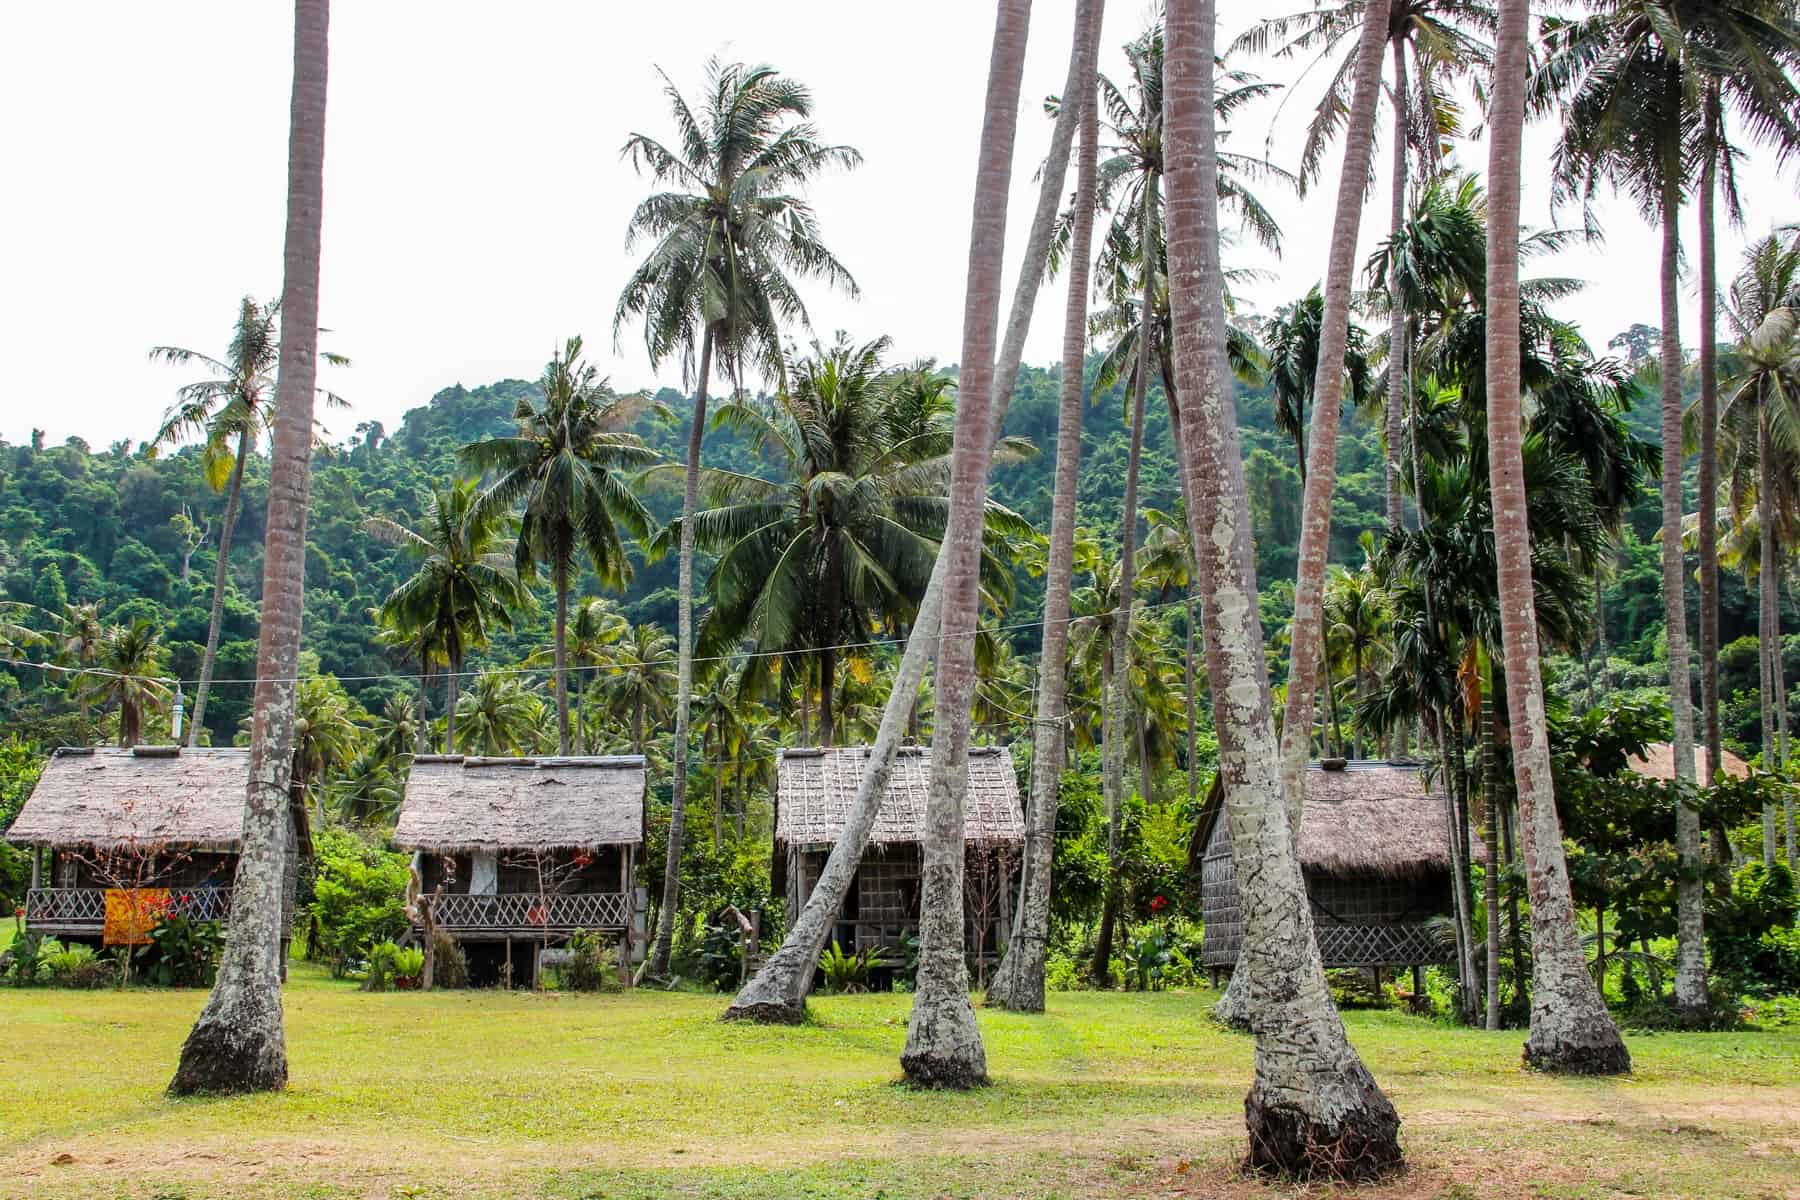 A row of wooden huts behind tall palm trees and in front of dense jungle